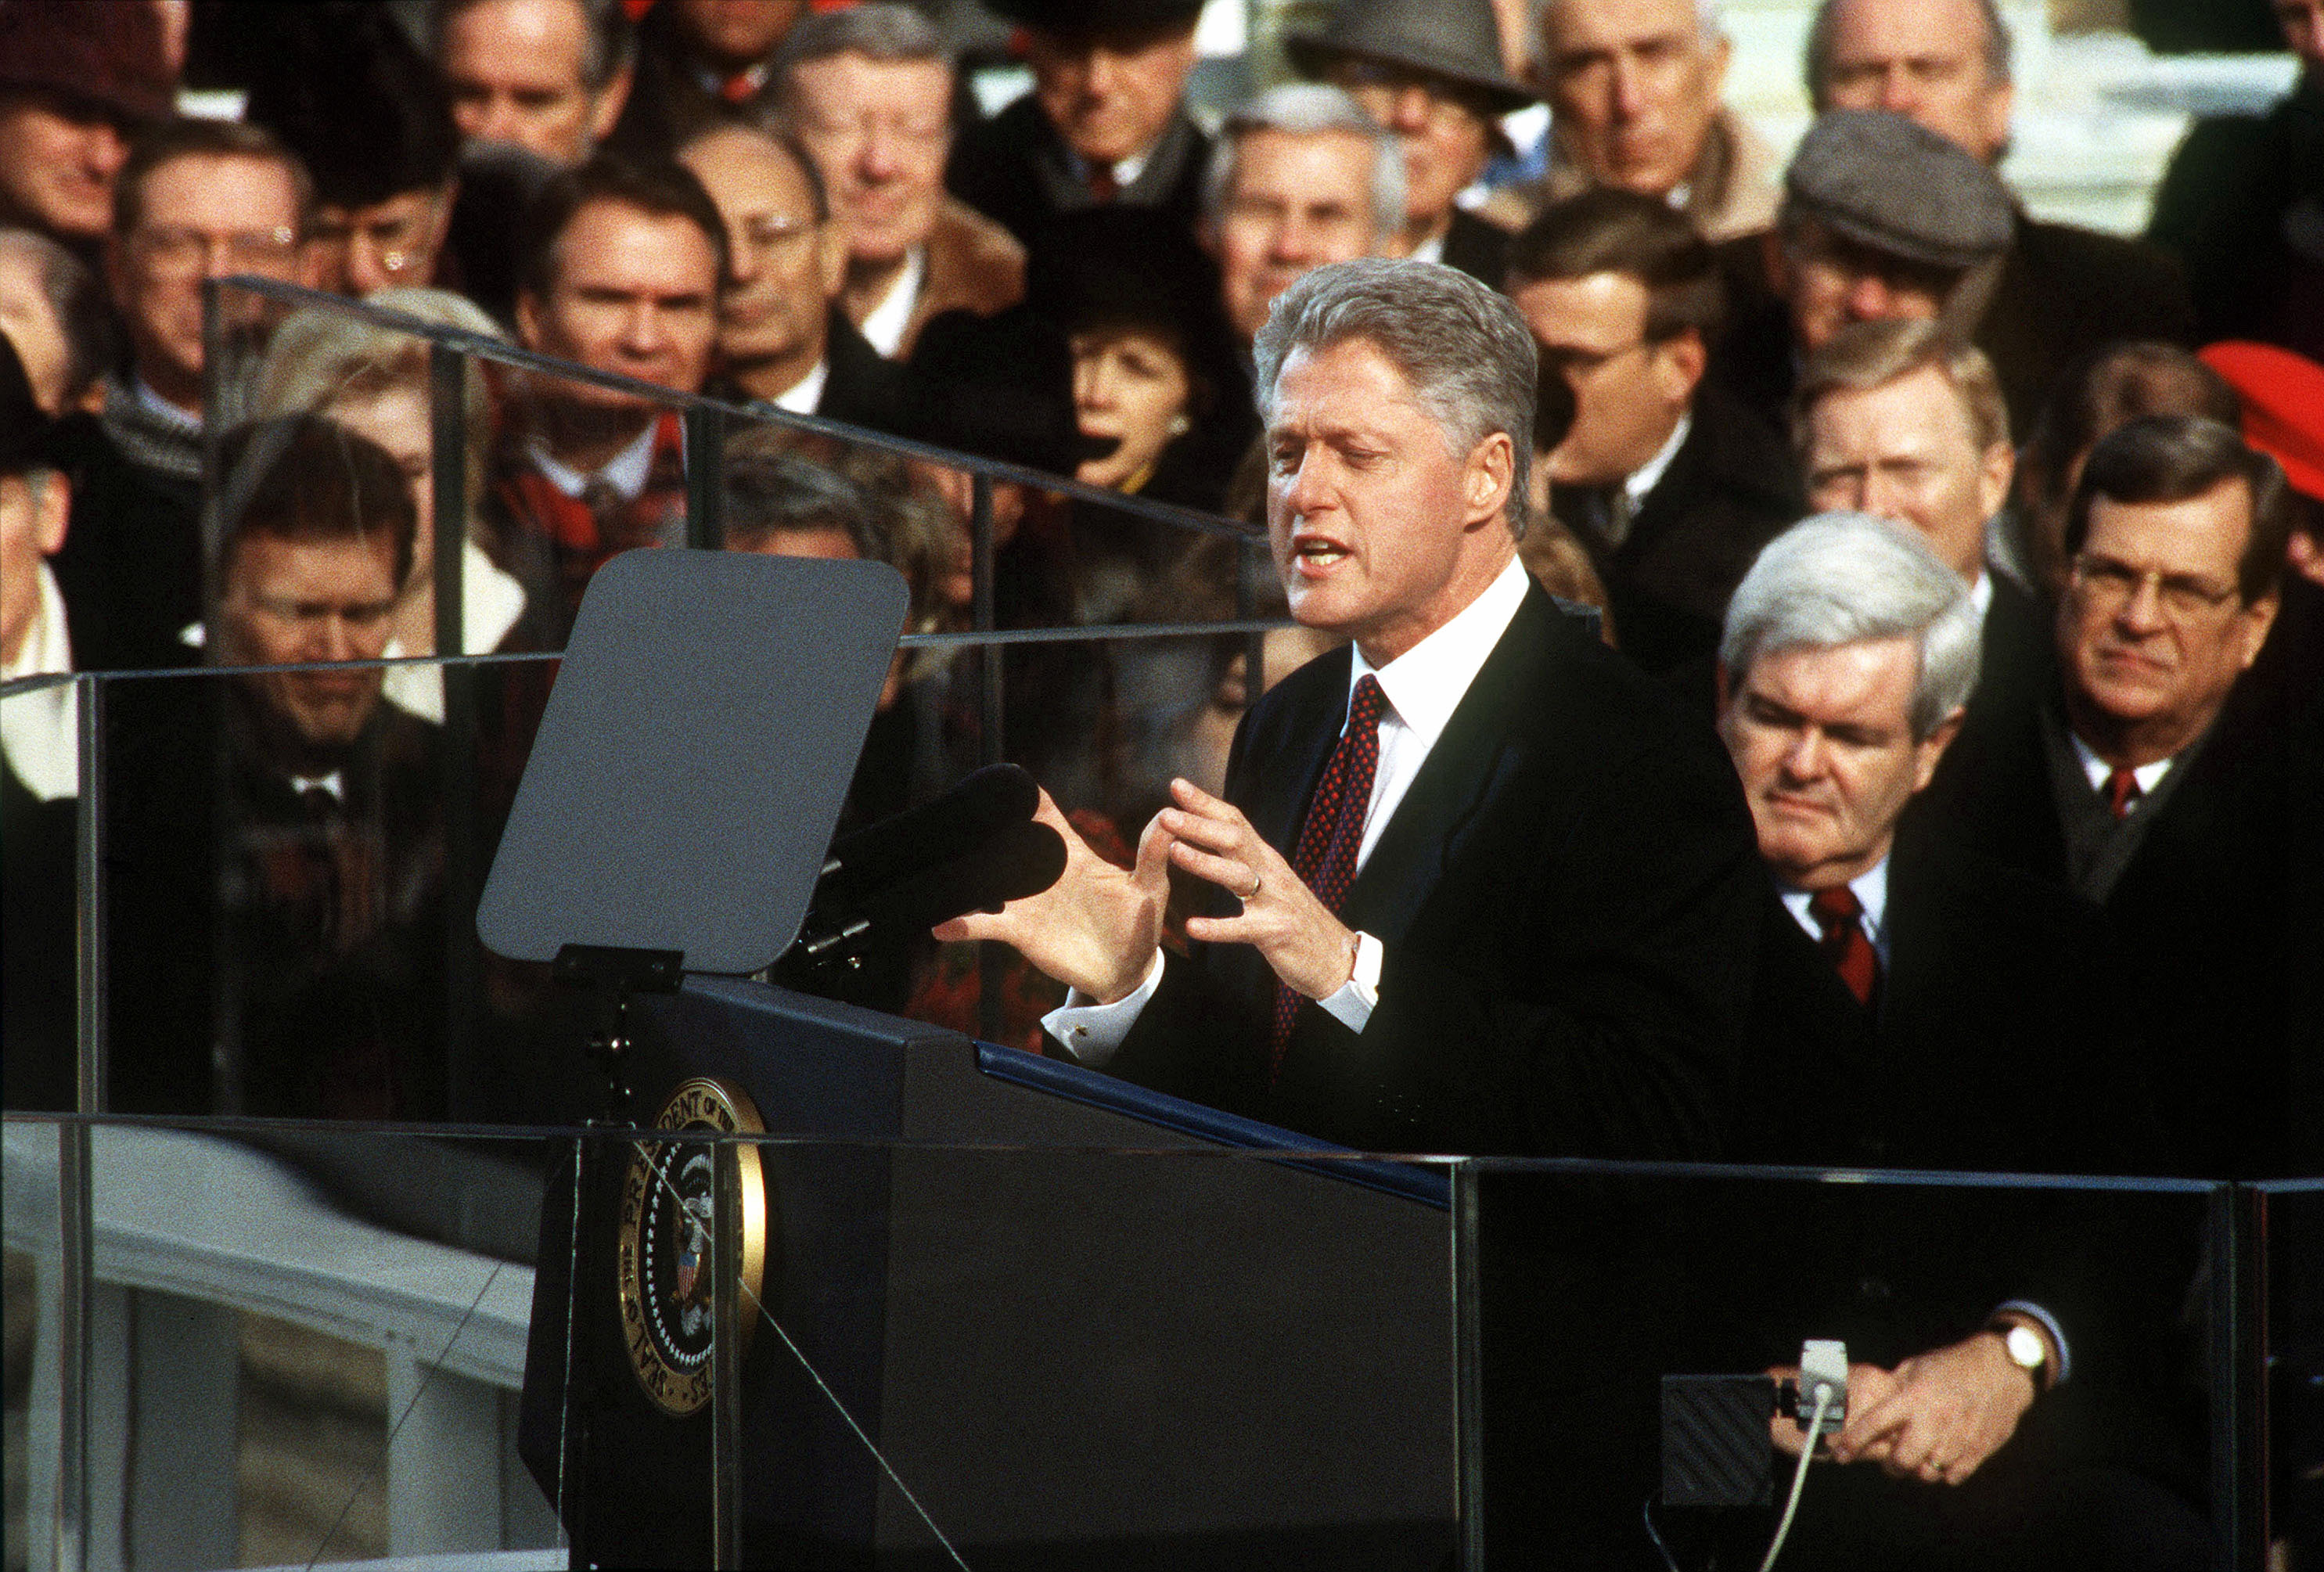 President Clinton's second Inaugural Address